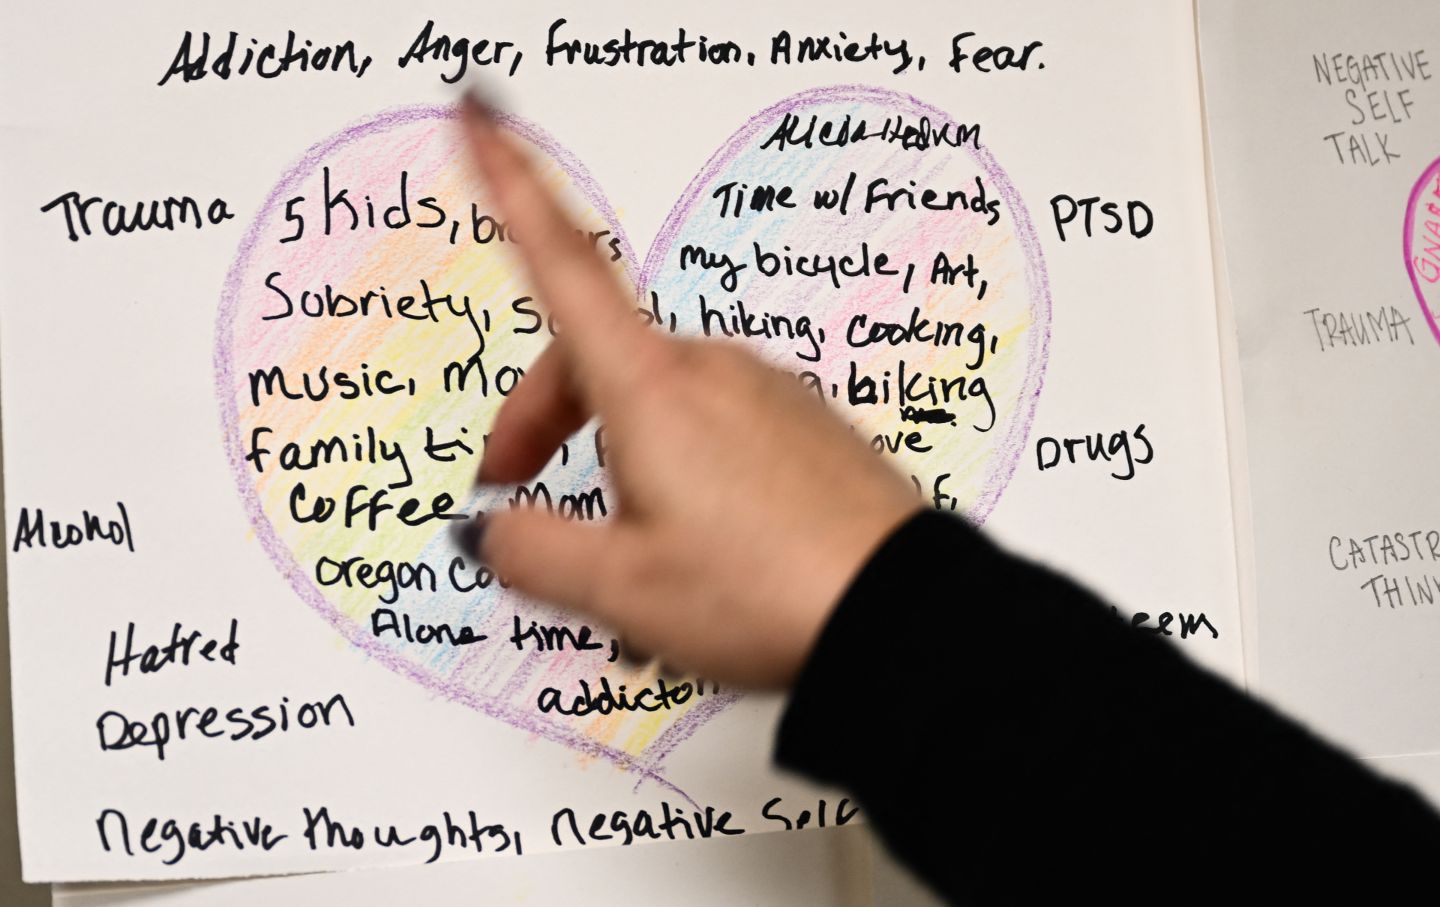 A hand-drawn poster with a heart on it, with words including "hiking, cooking, family time, art, my bicycle" inside the heart and "Addiction, anger, trauma, alcohol" outside the heart, with a hand pointing to the sign.